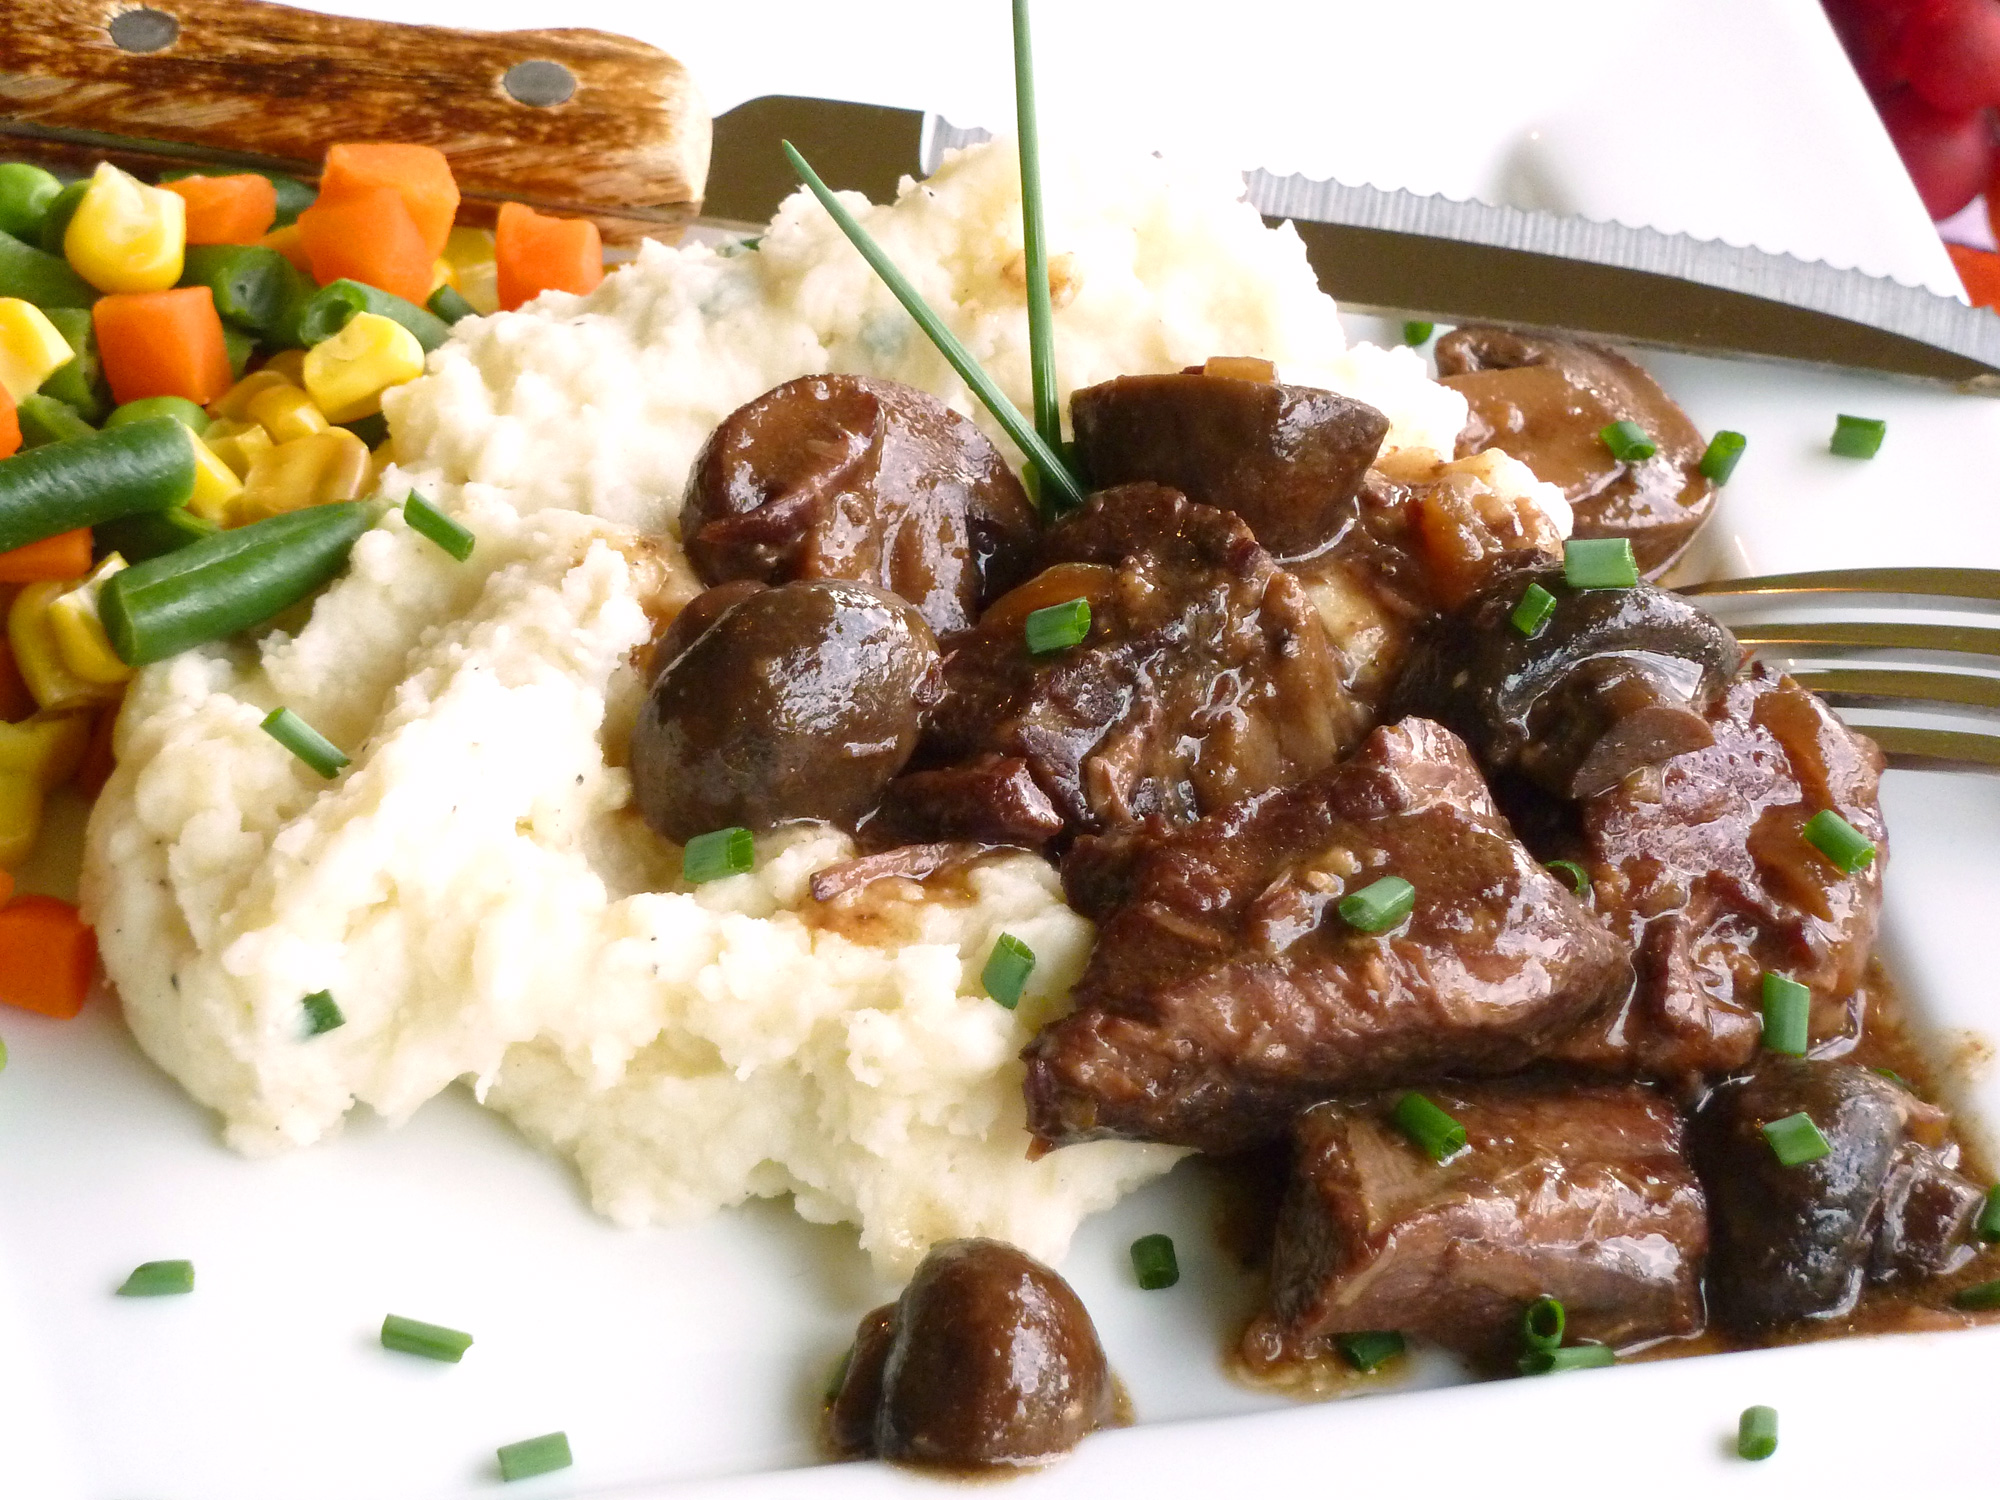 Tender, moist beef tips with luscious mushroom gravy are a snap in the crockpot.